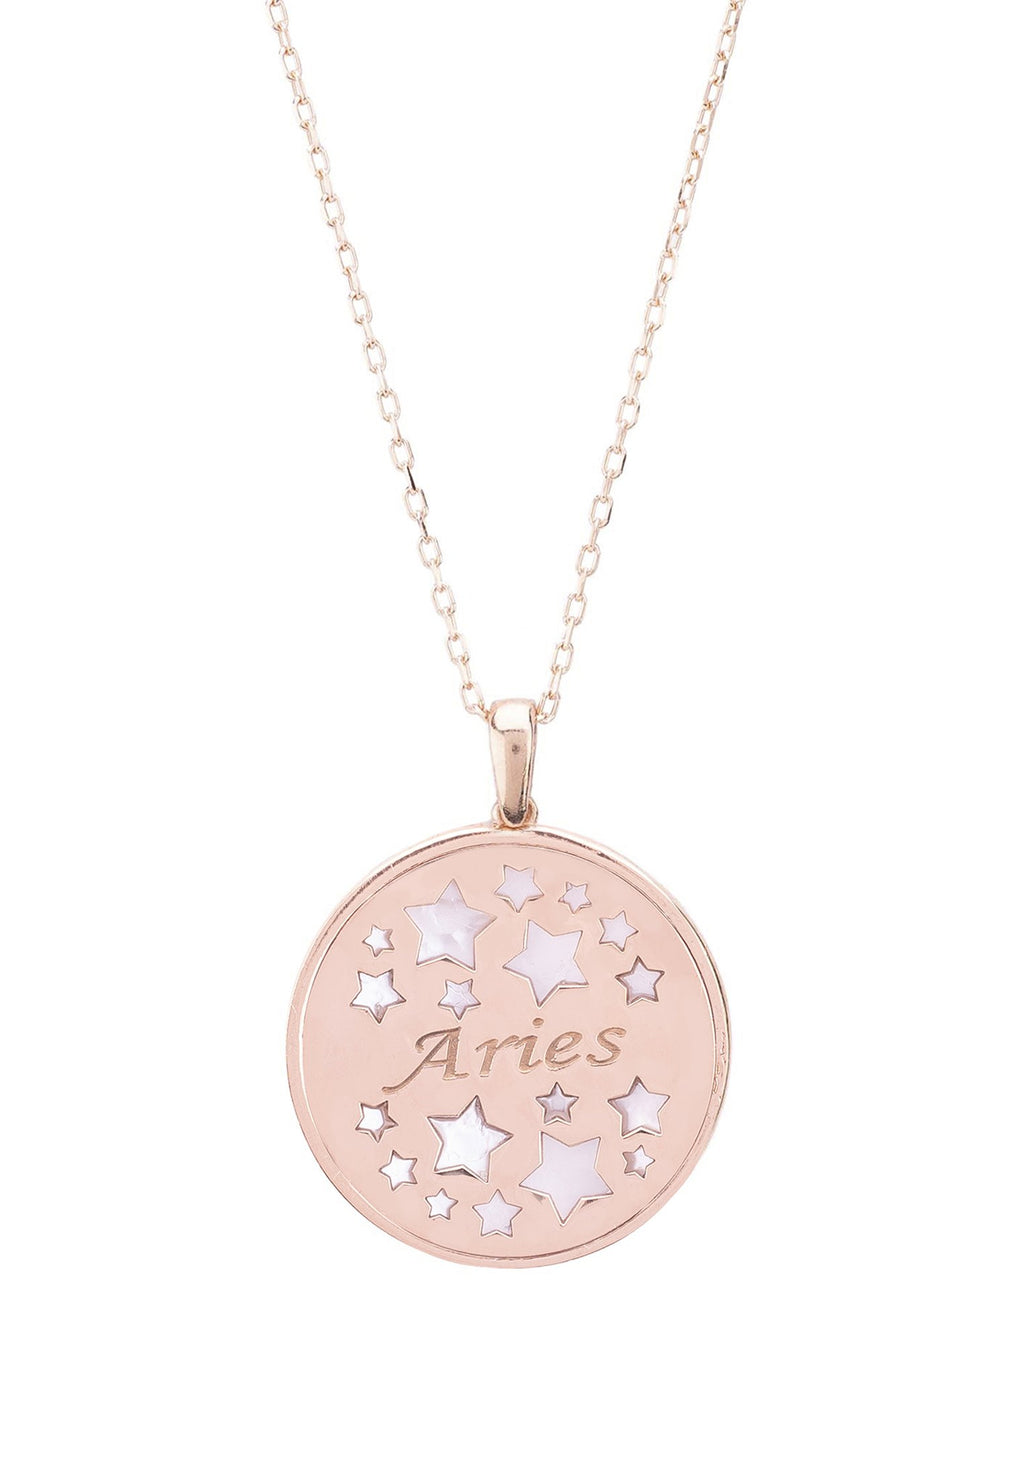 Zodiac Mother of Pearl Gemstone Star Constellation Pendant Necklace Aries